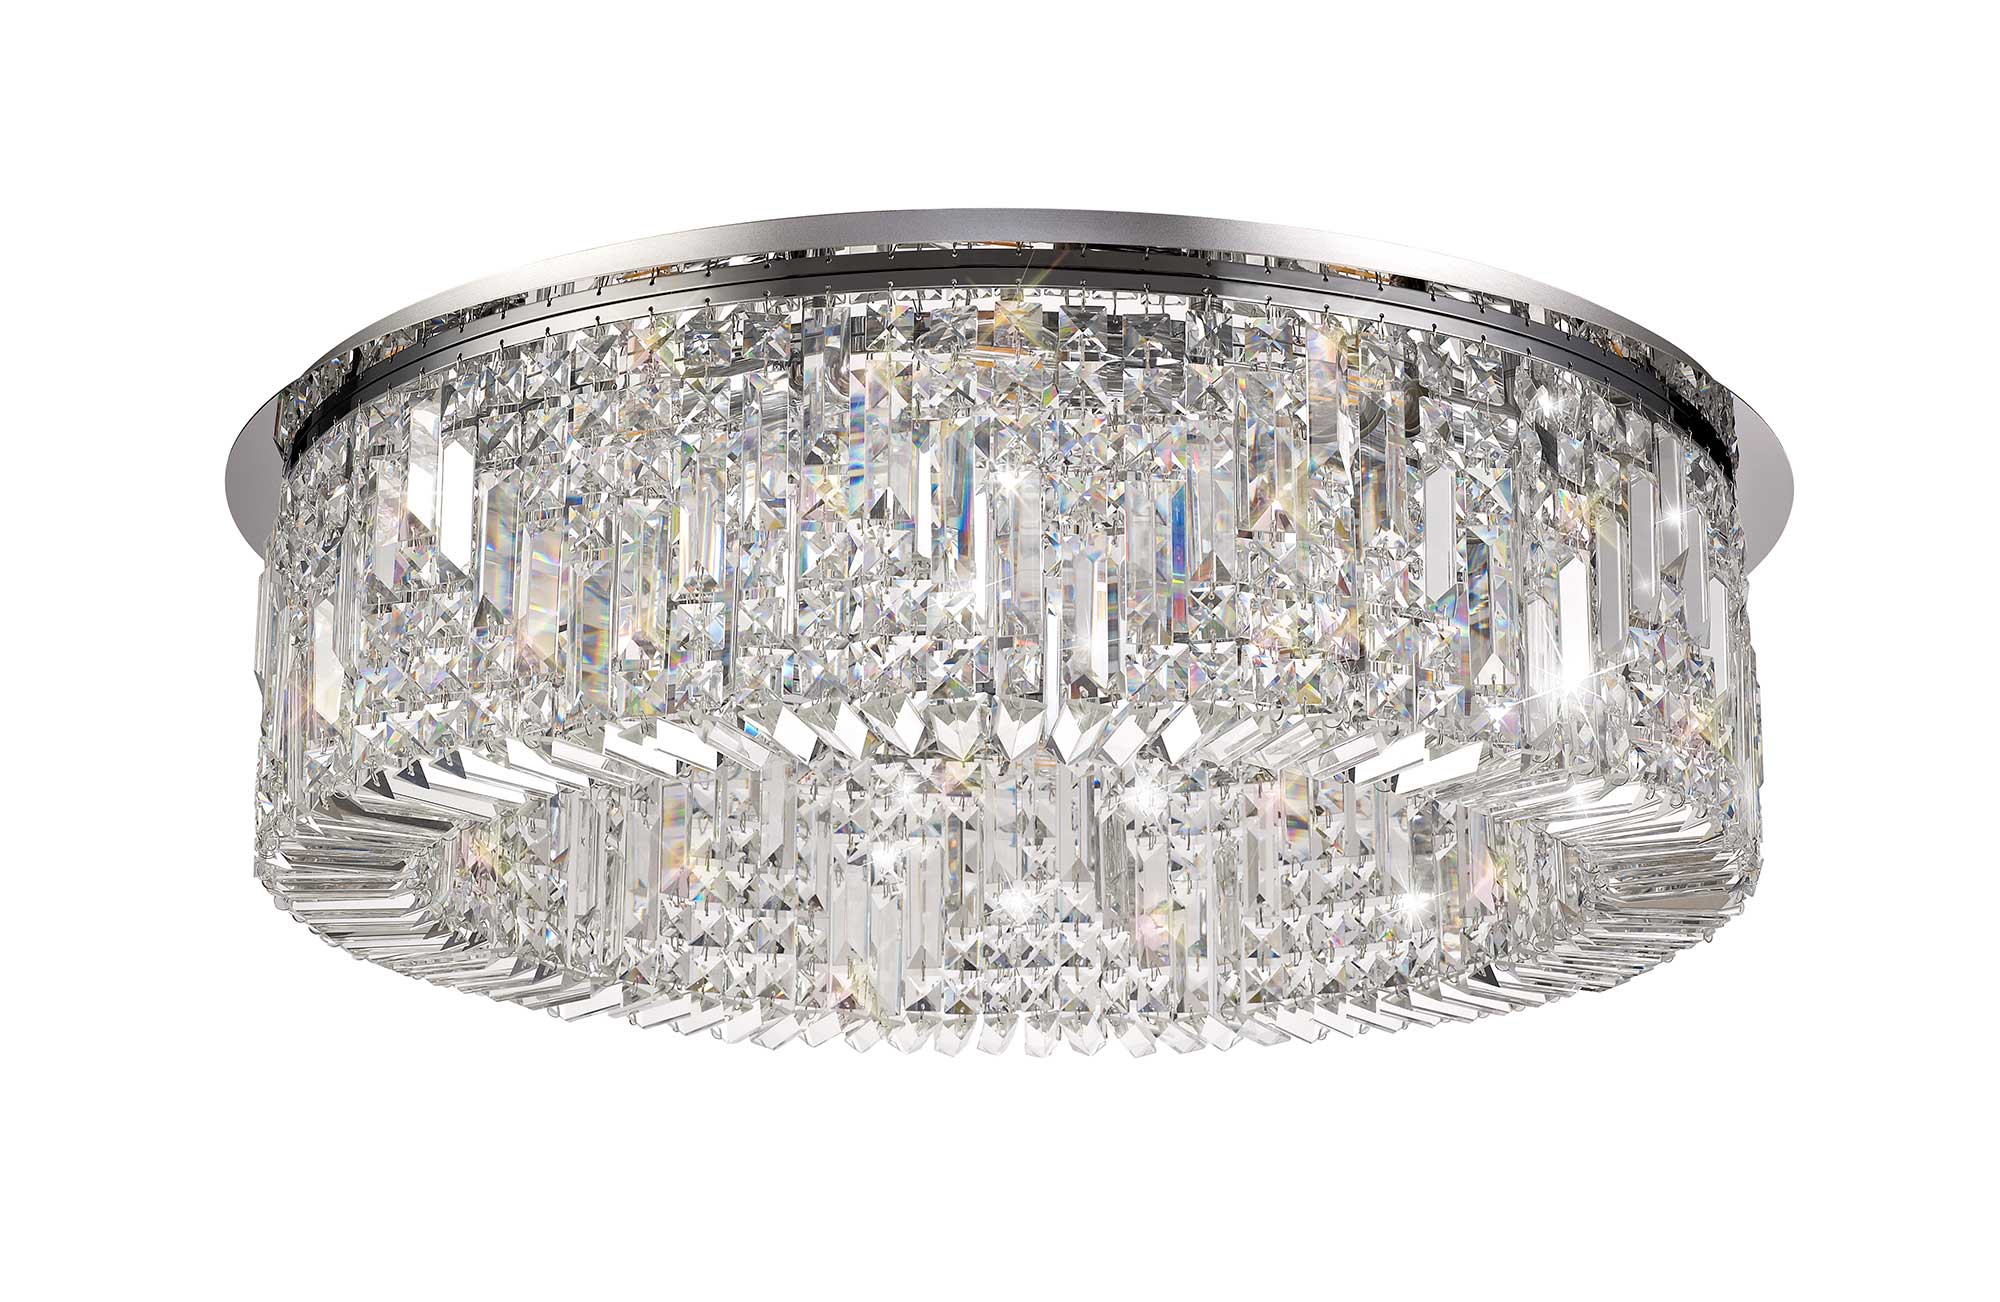 chrome crystal chandelier dining room